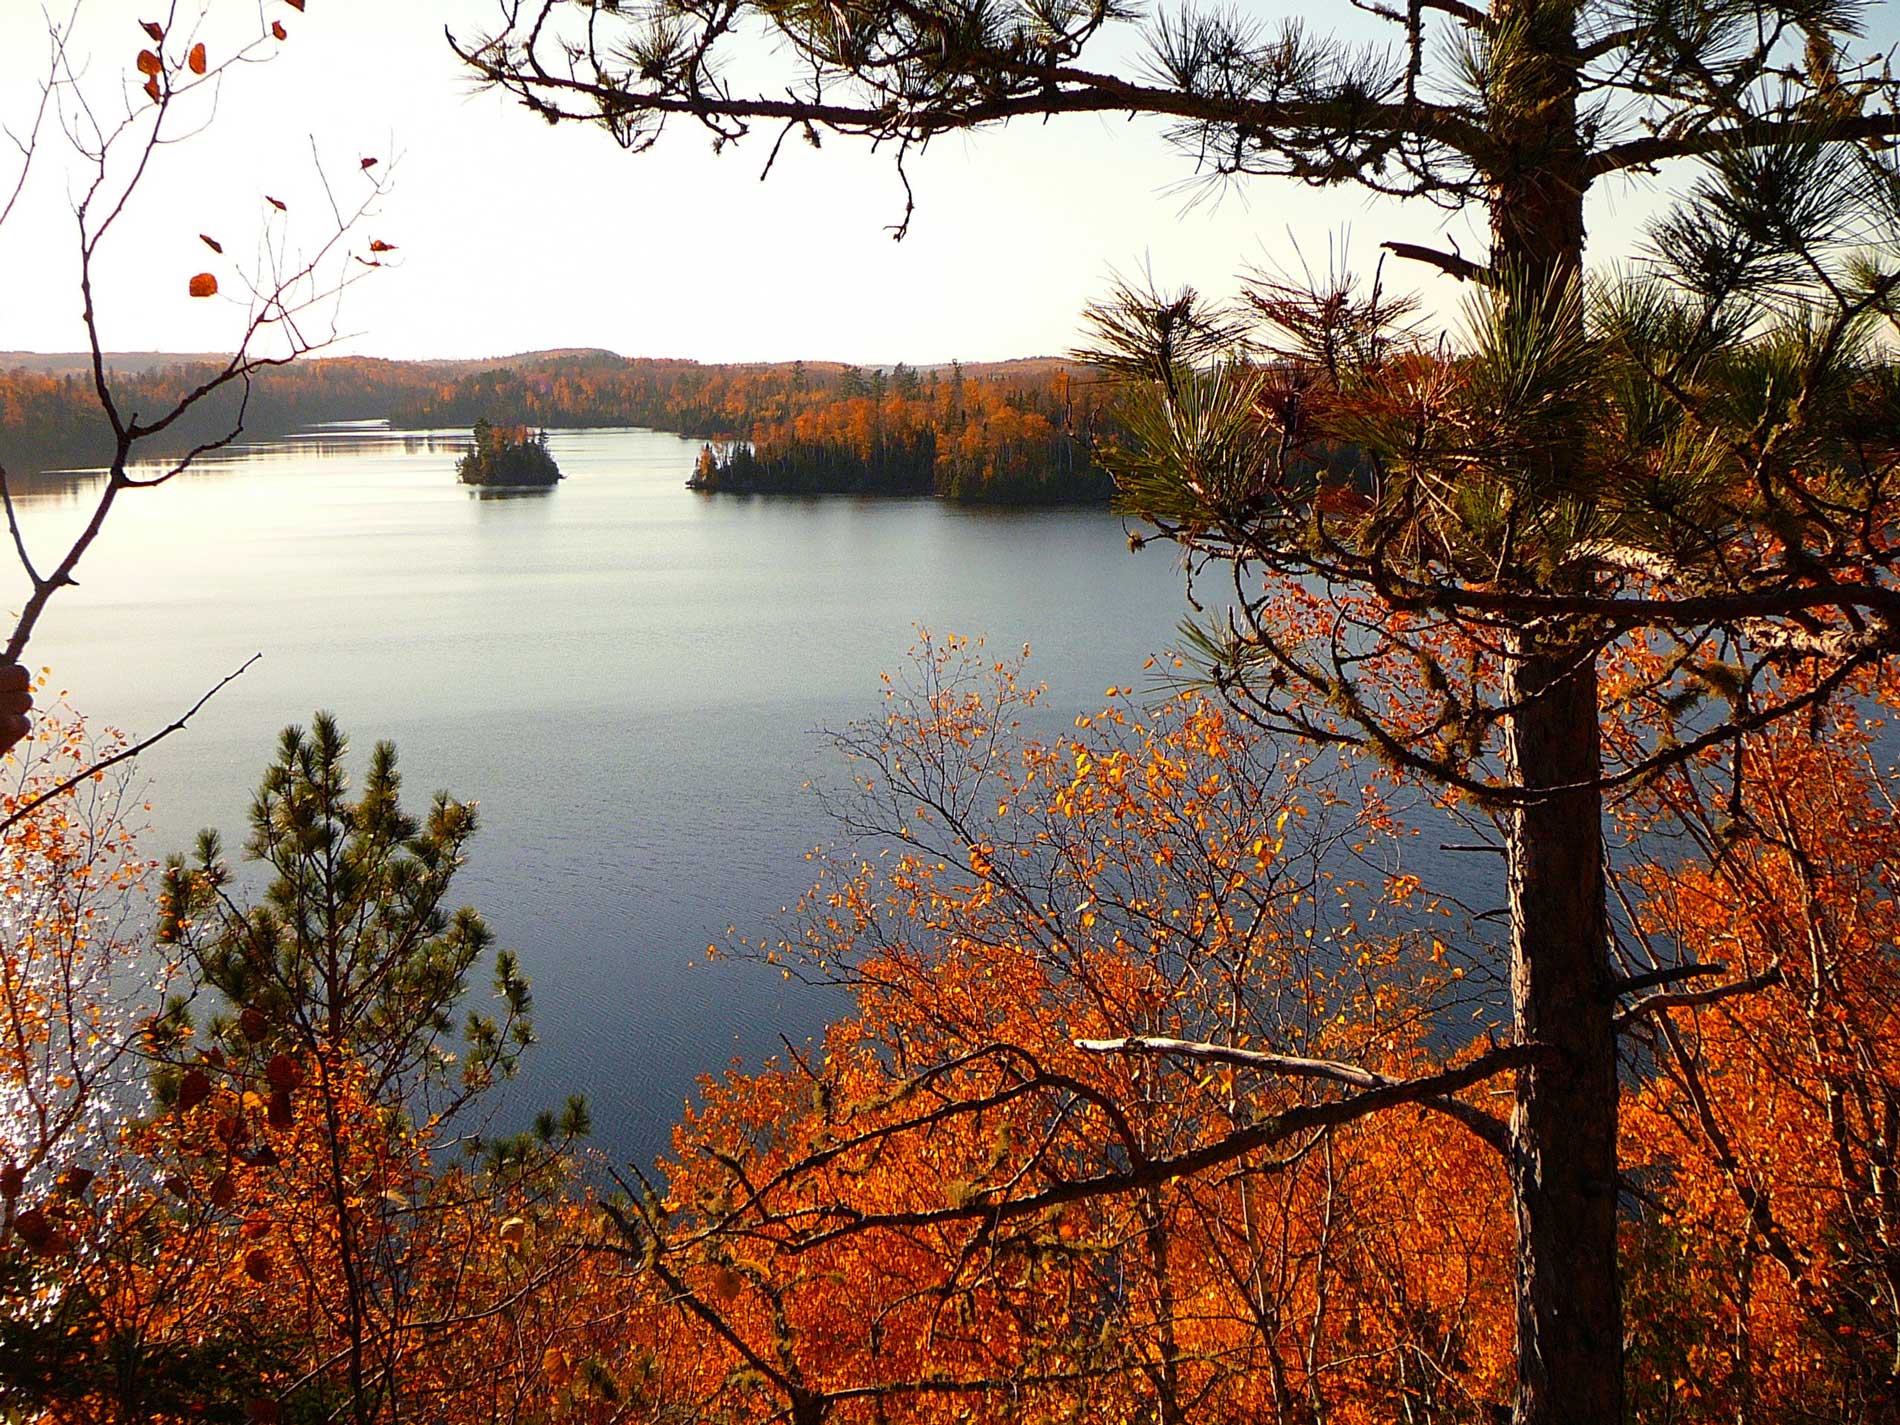 Fall leaves and colors at the Flour Overlook on East Bearskin Lake